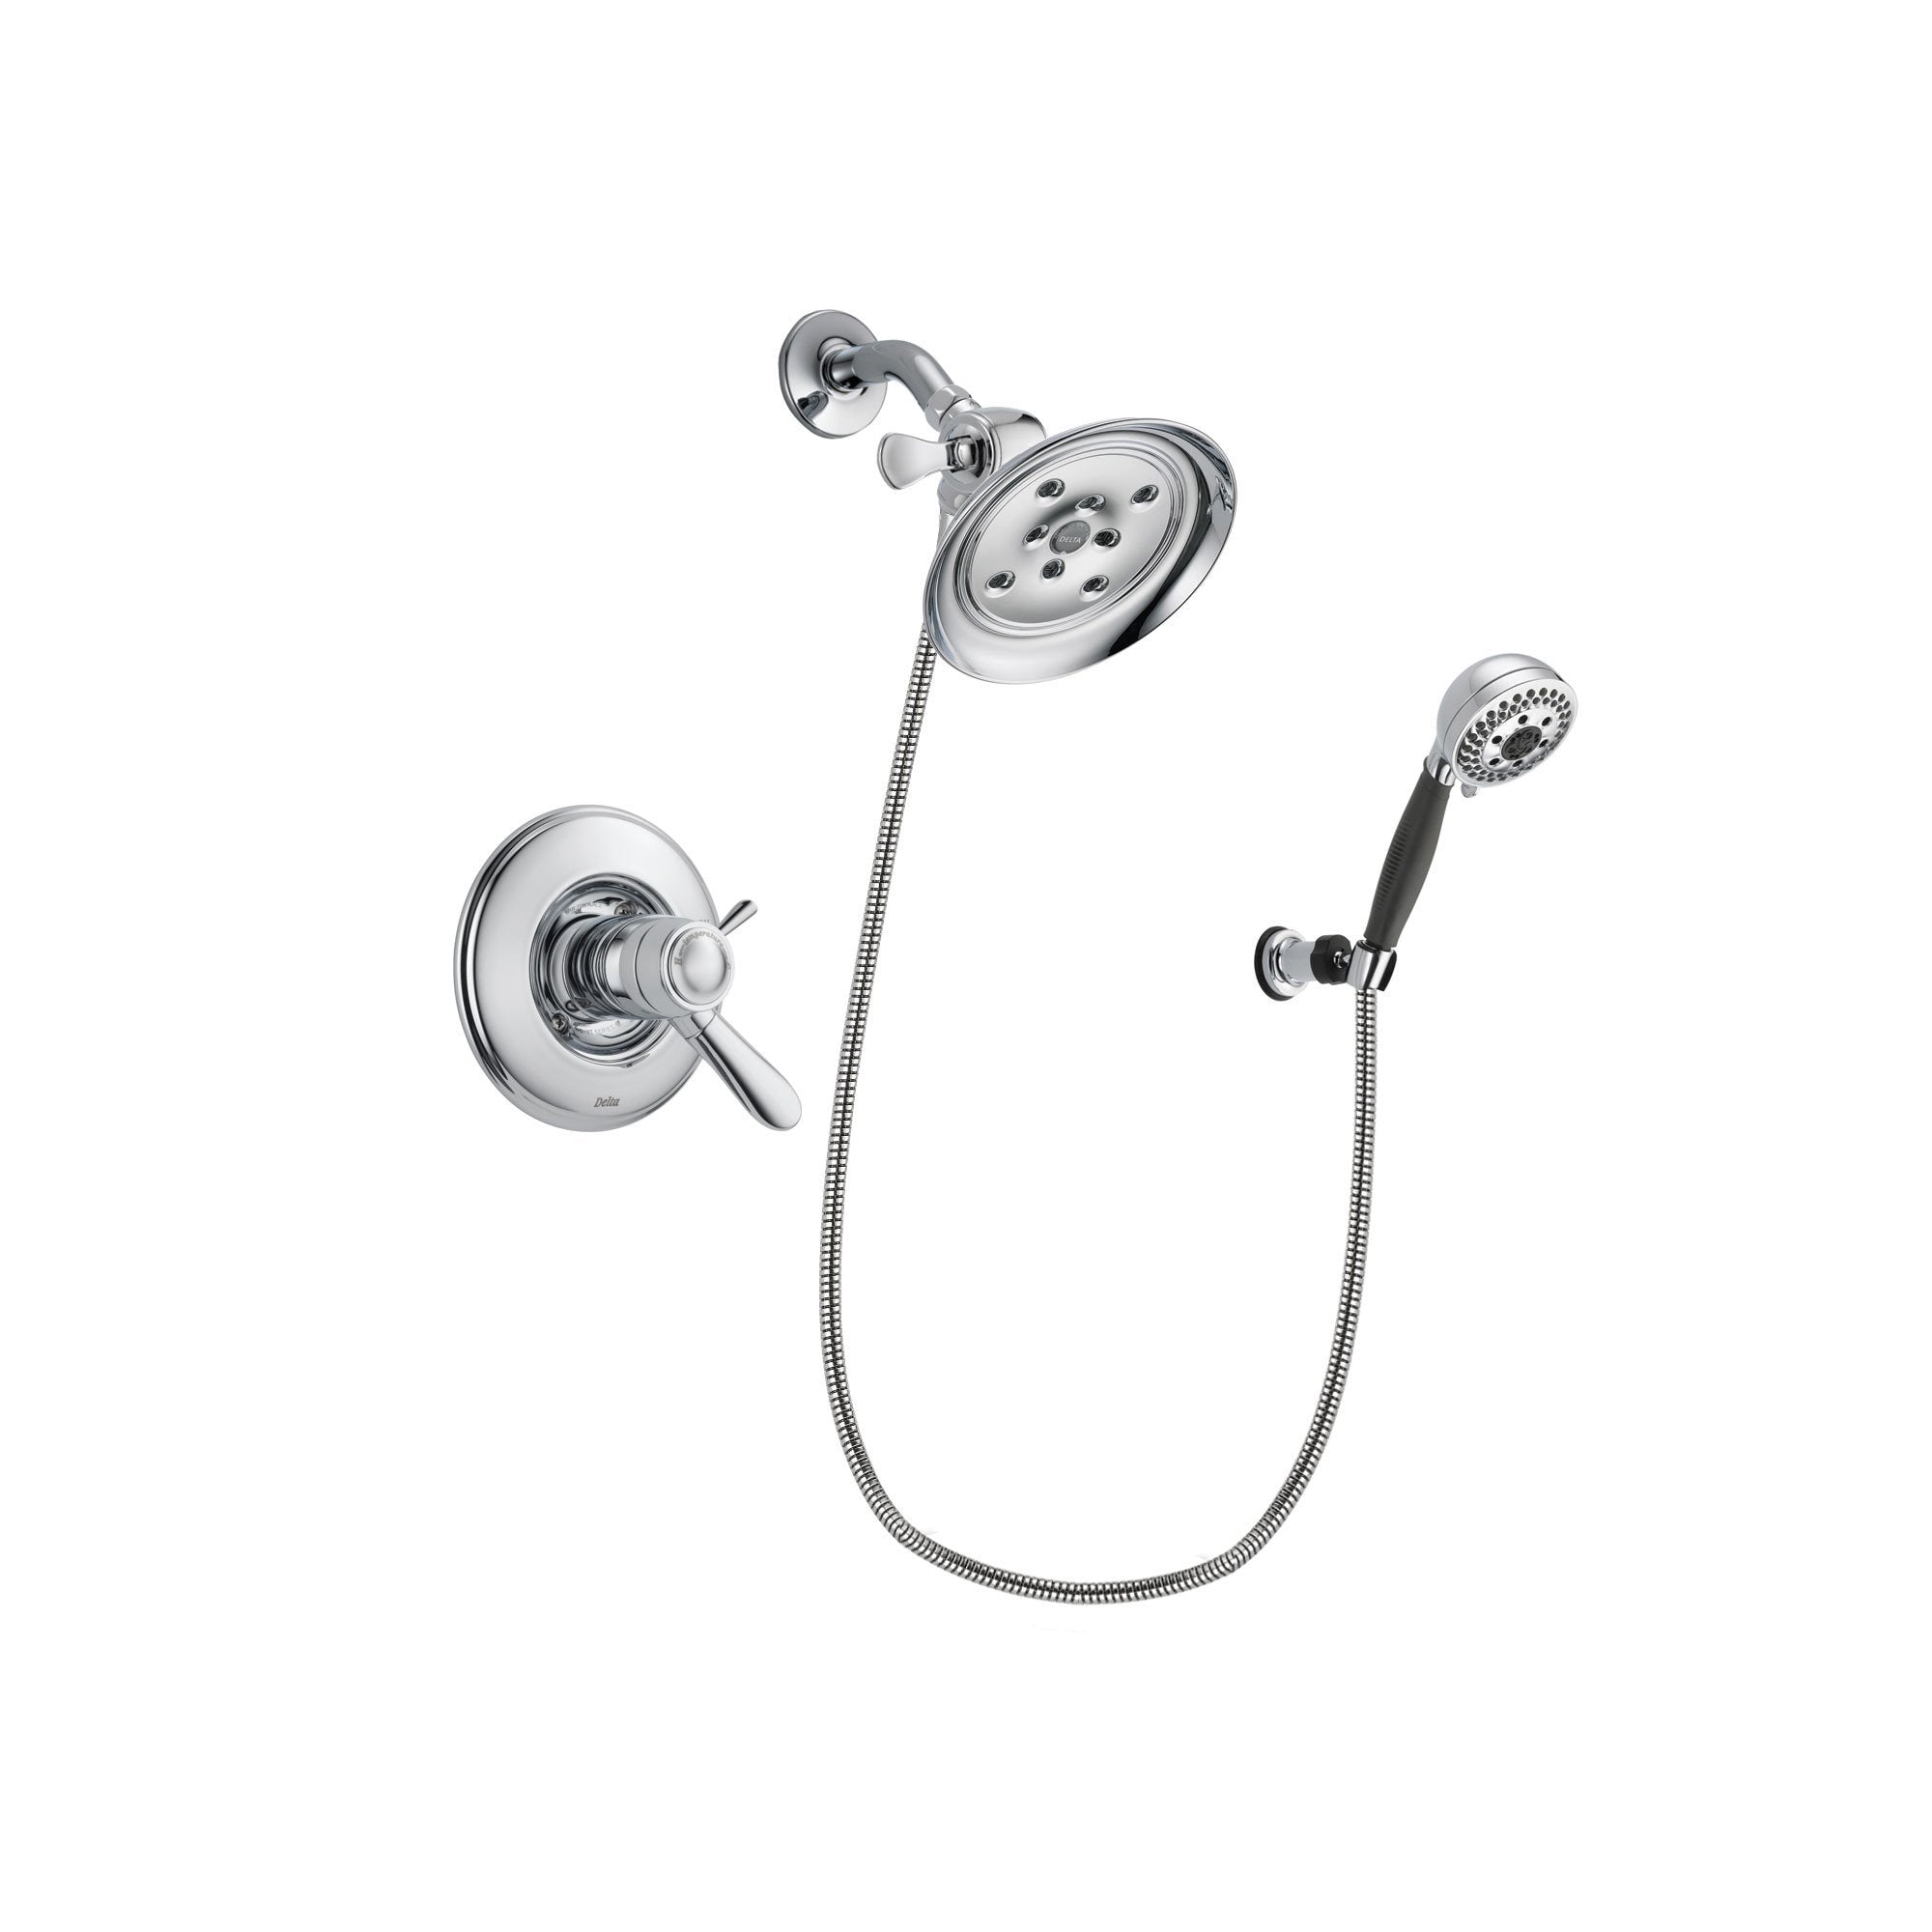 Delta Lahara Chrome Shower Faucet System w/ Shower Head and Hand Shower DSP1174V